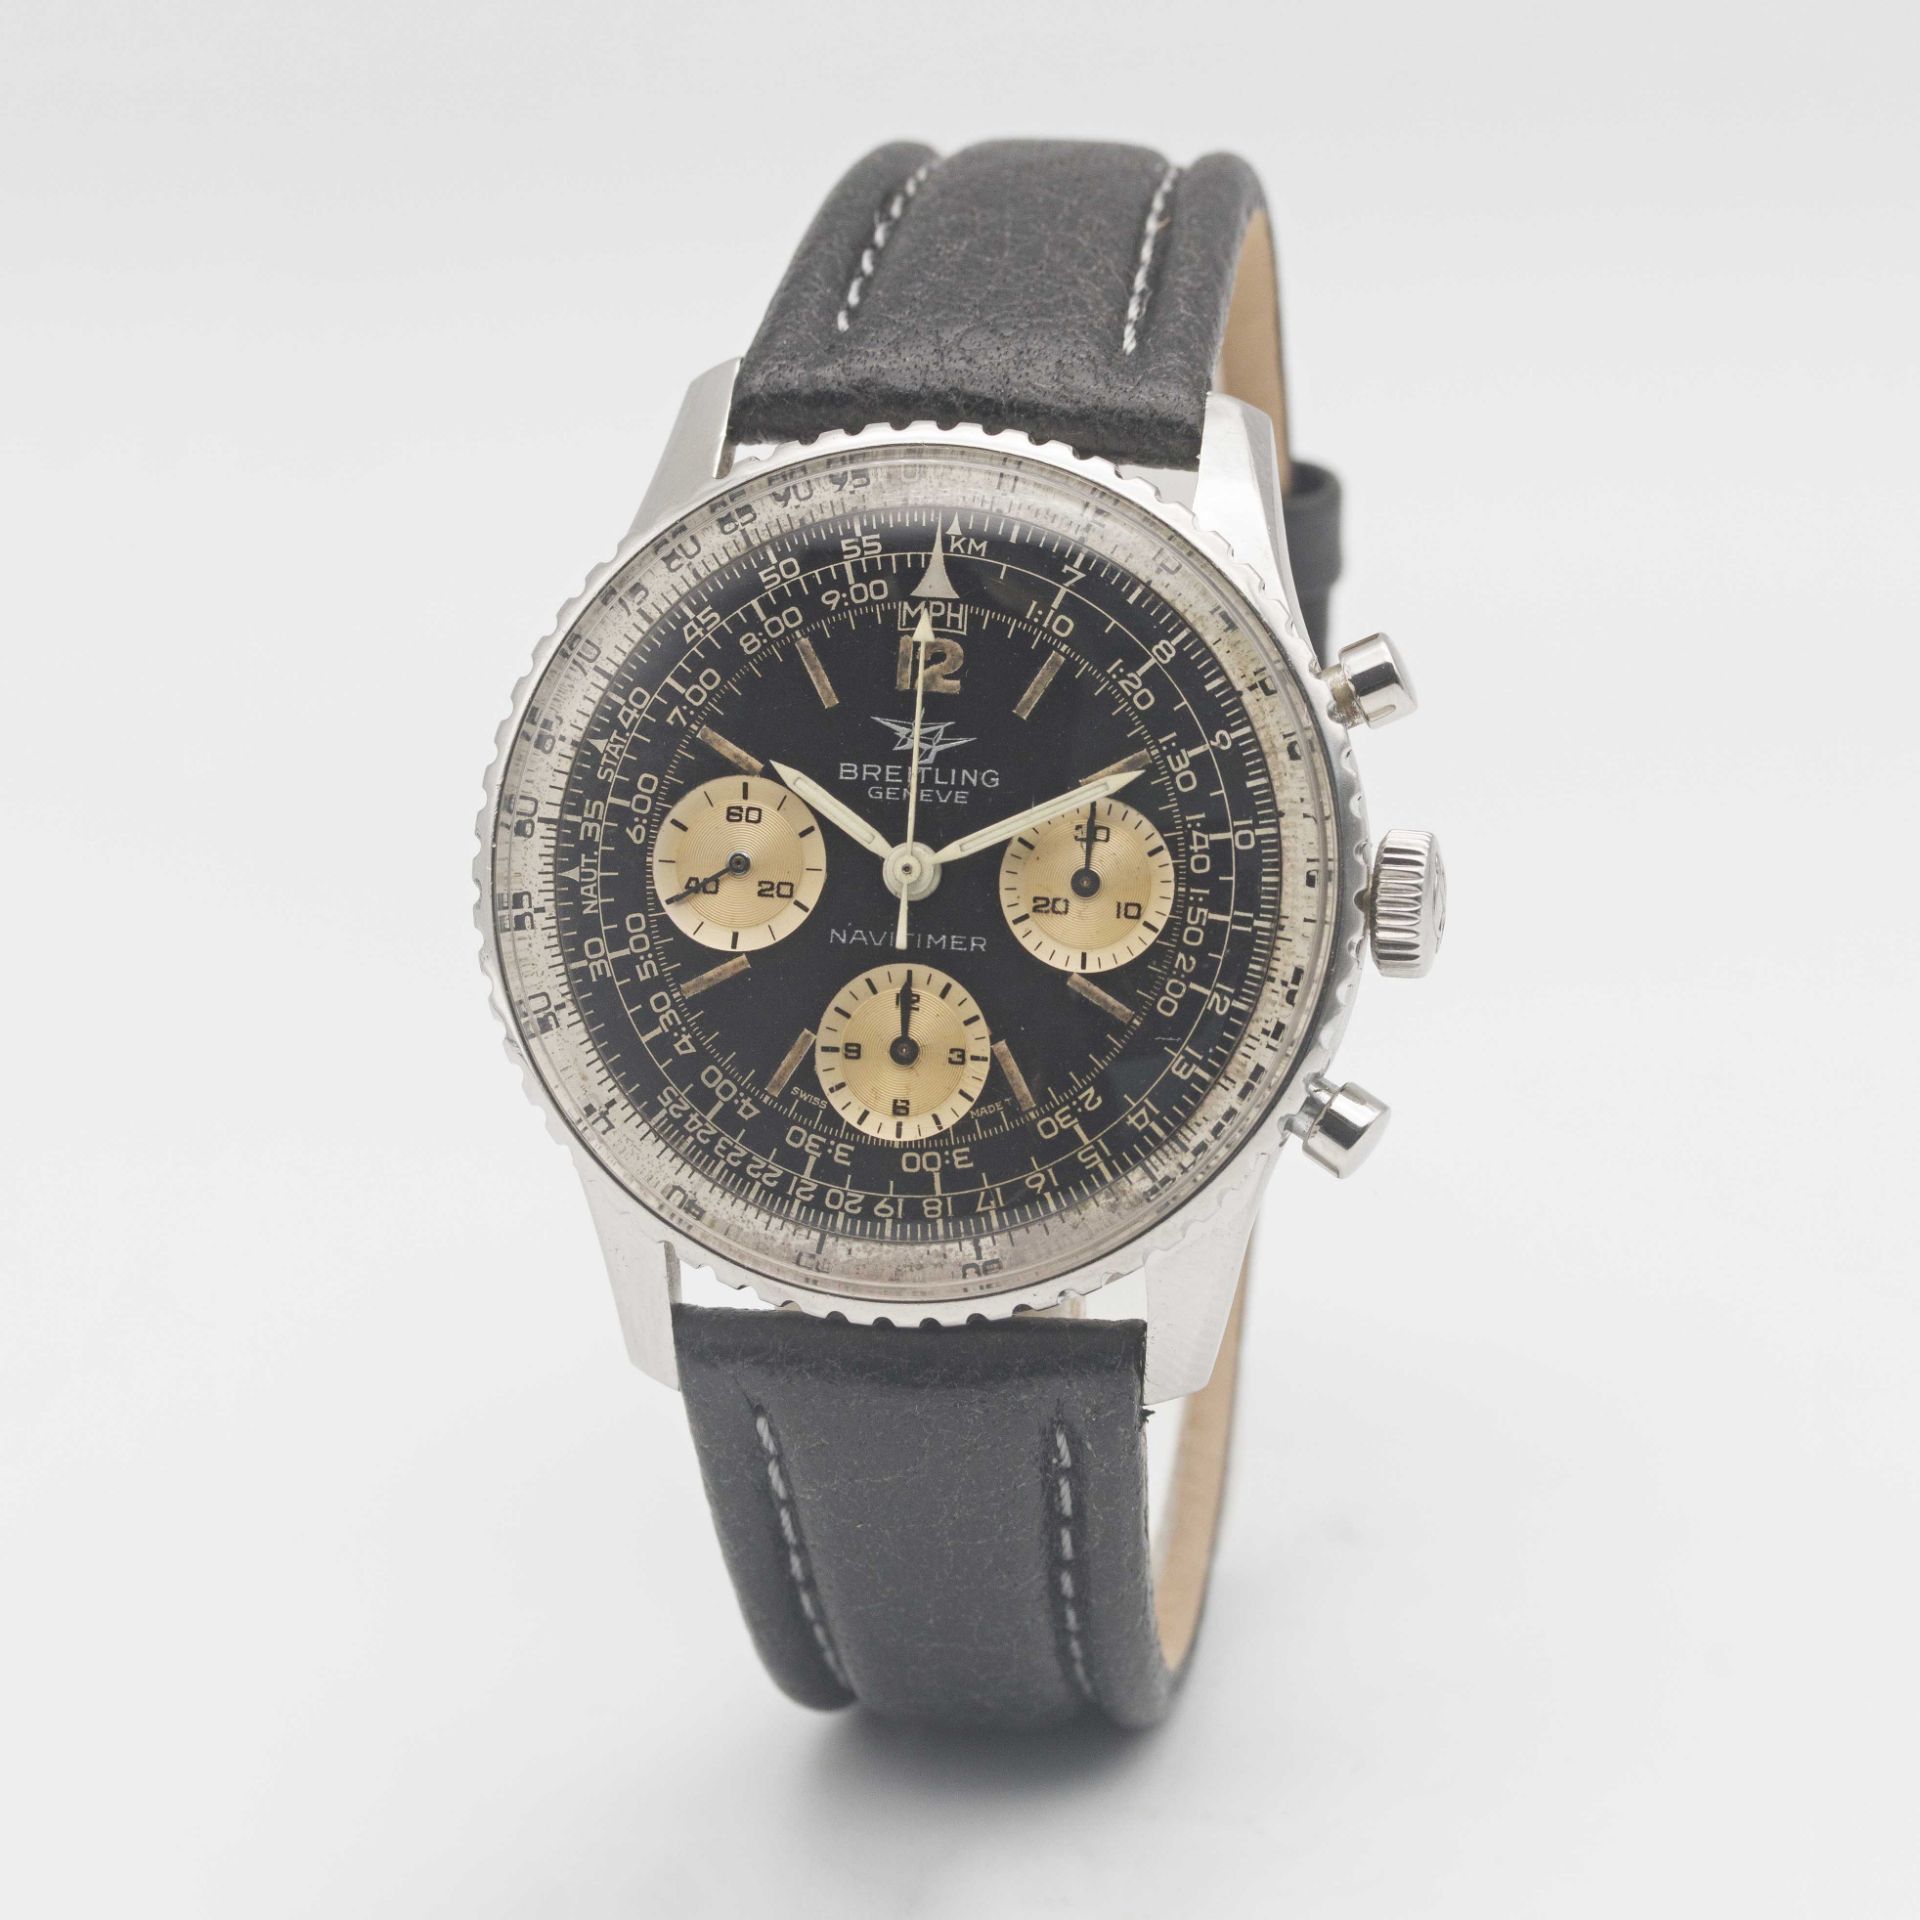 A GENTLEMAN'S STAINLESS STEEL BREITLING NAVITIMER CHRONOGRAPH WRIST WATCH CIRCA 1966, REF. 806 - Image 4 of 9